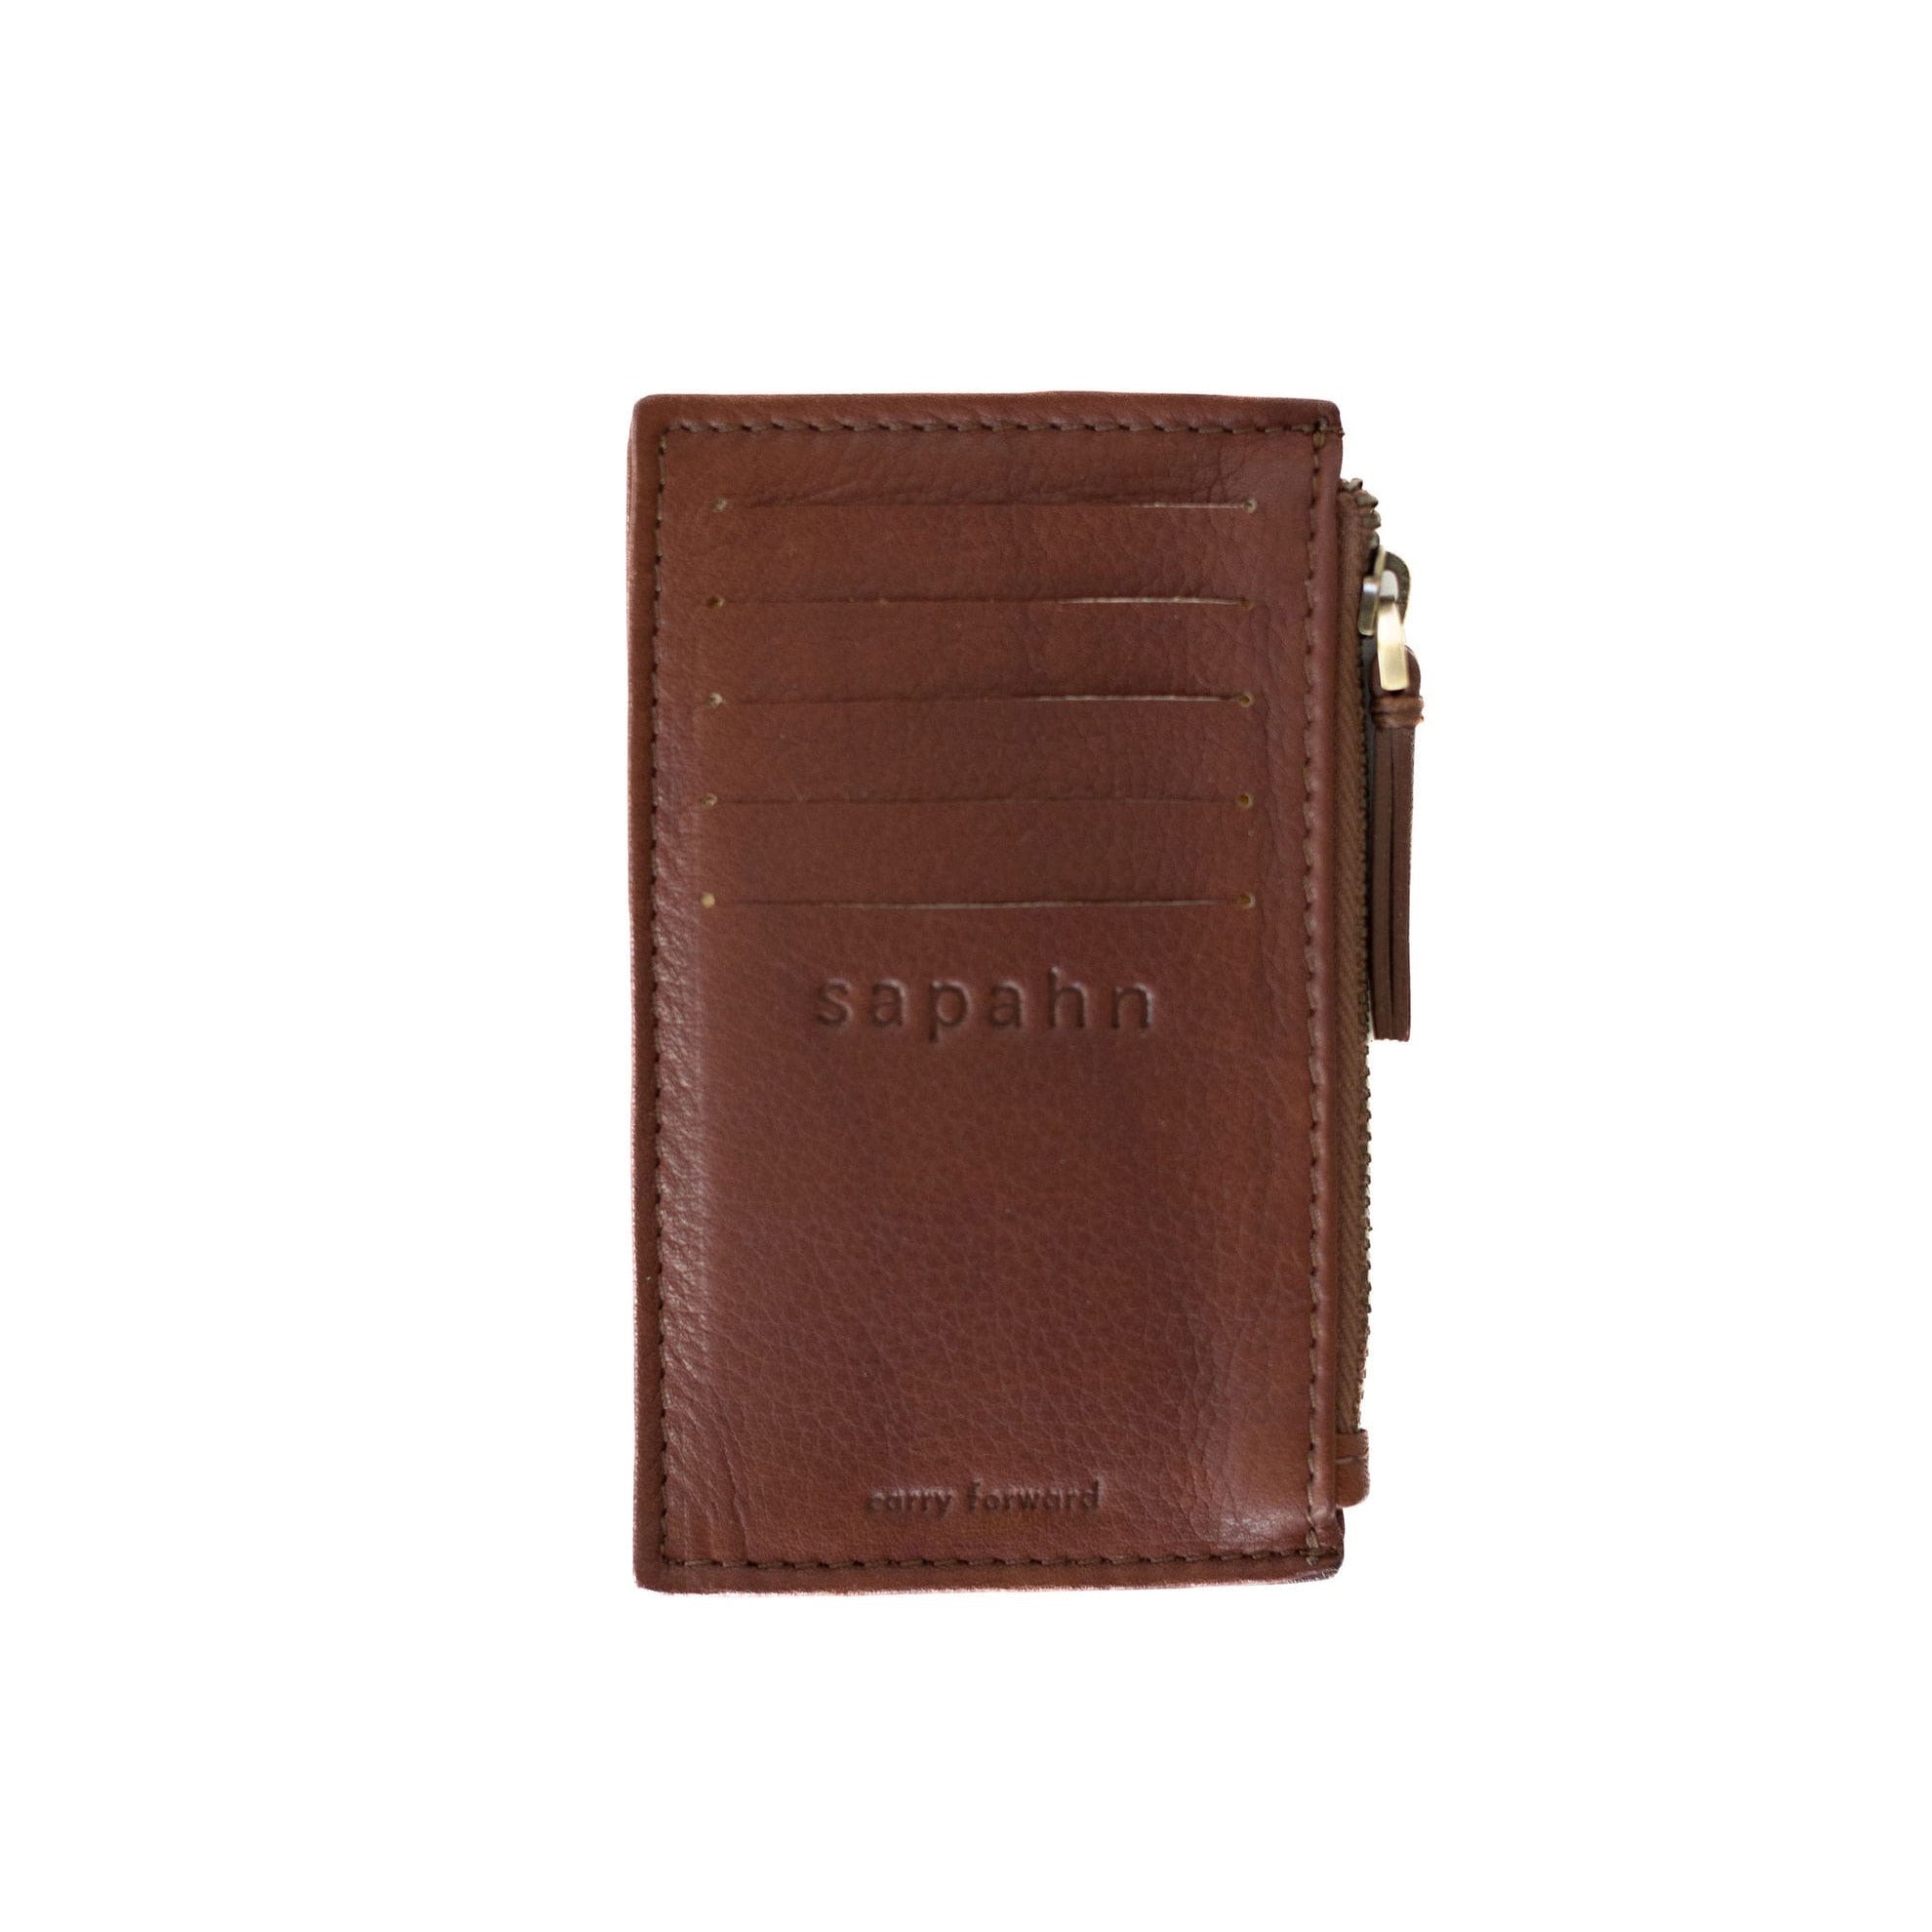 Men's wallet made of leather Wax oil skin purse for men Coin Purse Short  Male Card Holder Wallets Zipper Around Money Bag 2022